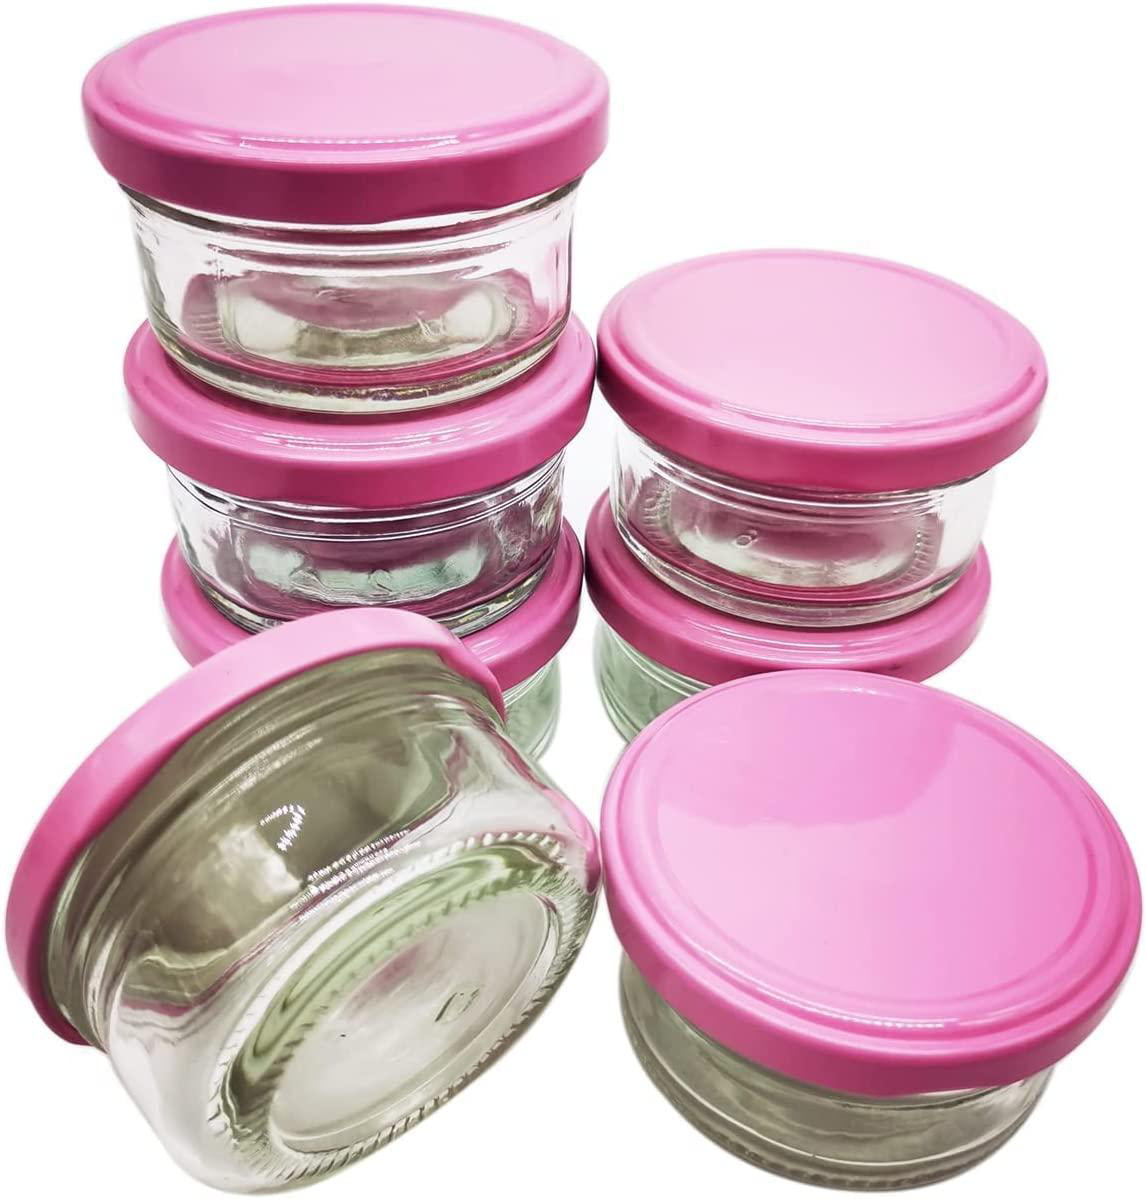 Ksooly 1.3 oz. Salad Dressing Containers, 6 Pack Small Condiment Container with Lids, Mini Meal Prep Sauce Cups, Reusable, BPA Free